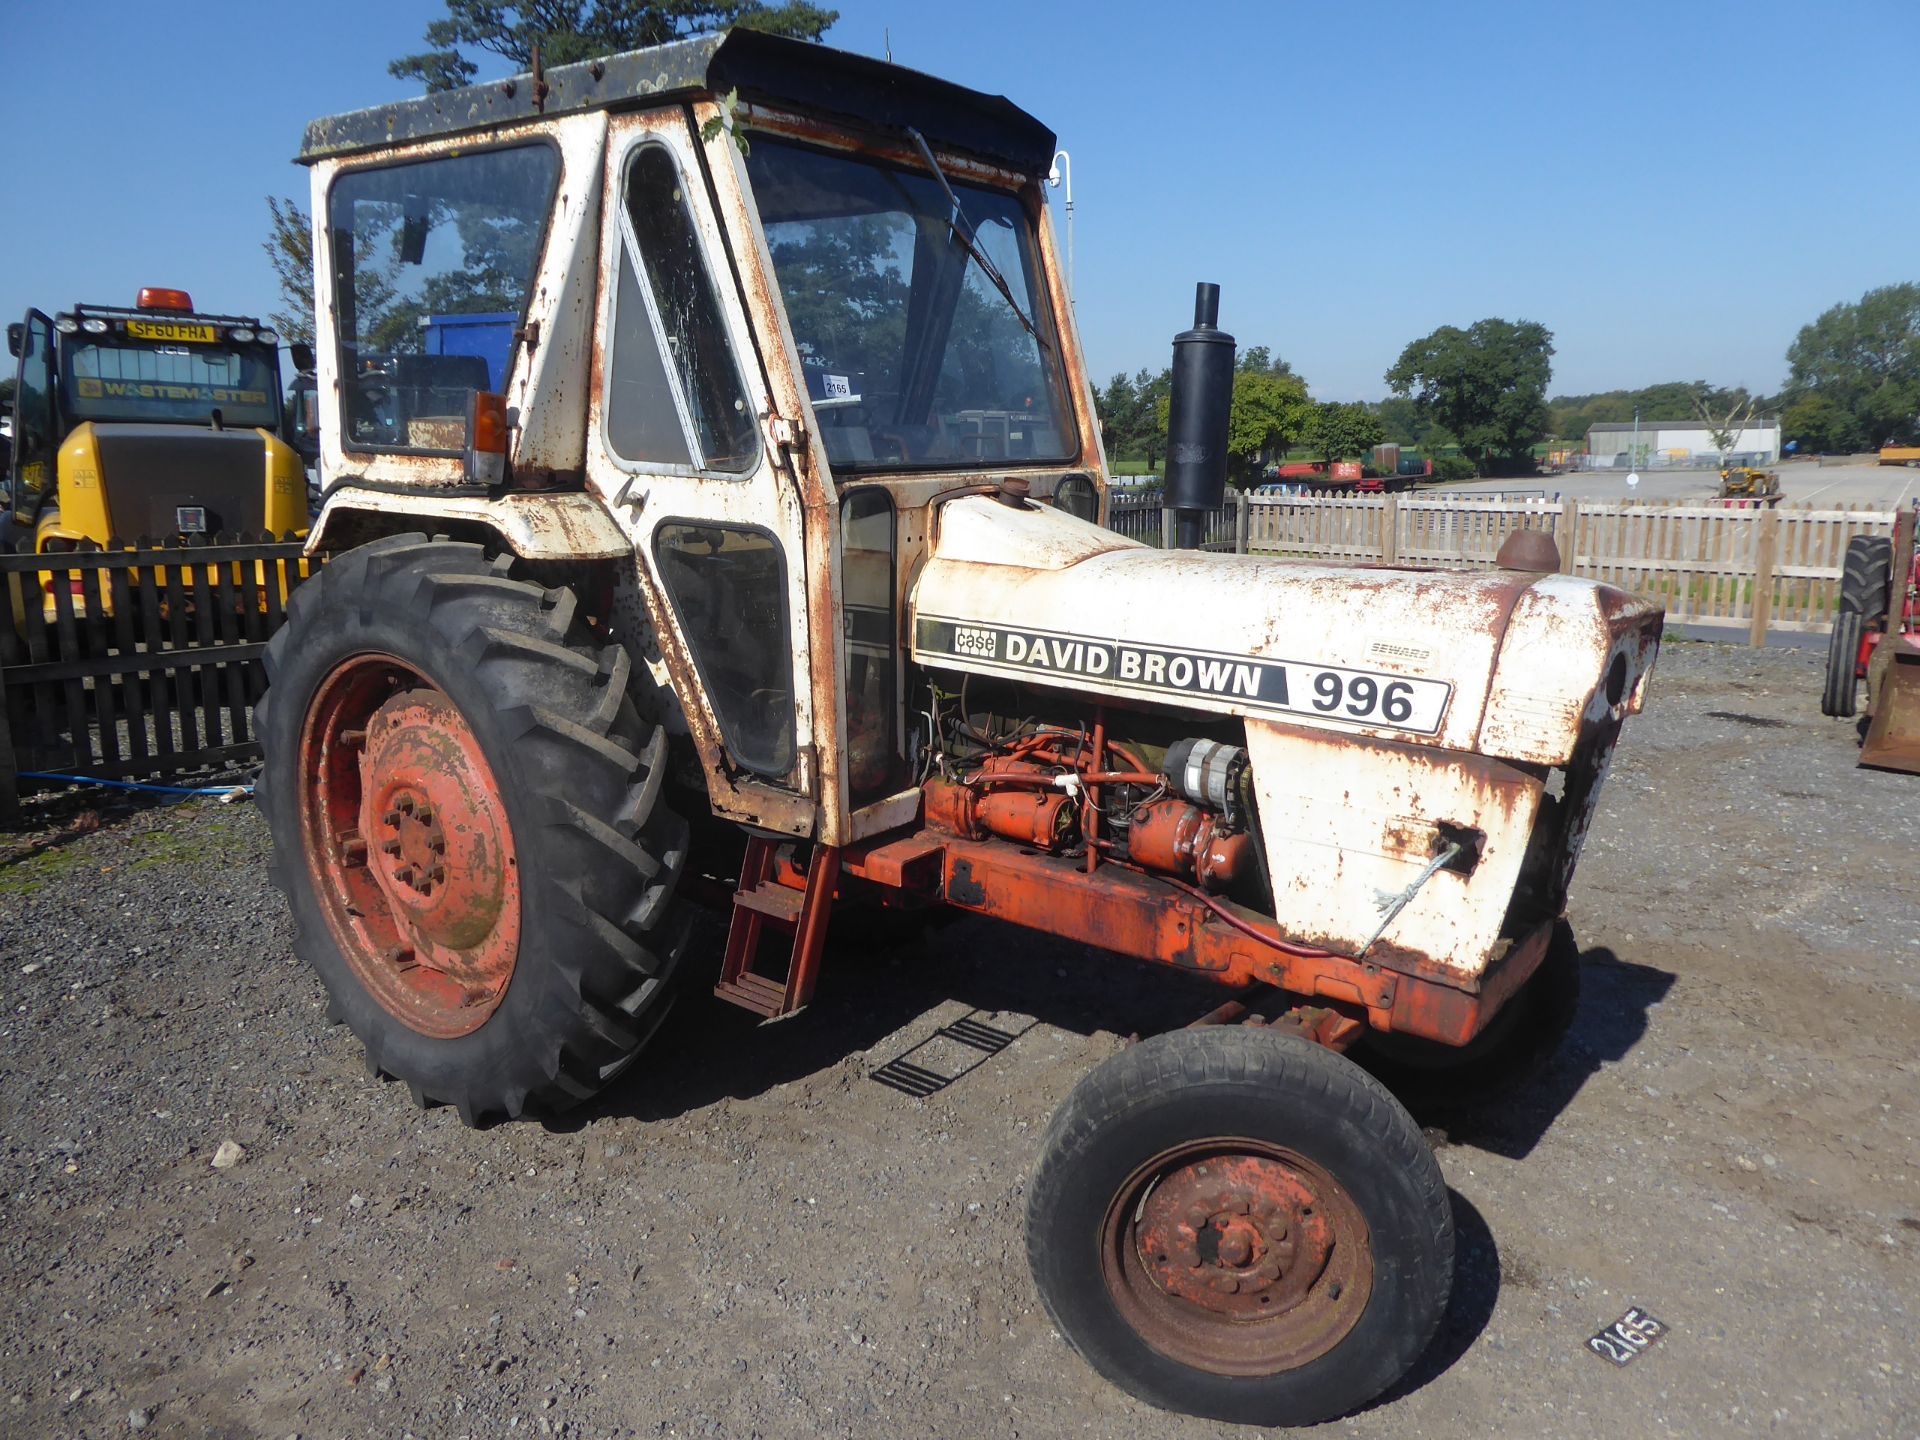 David Brown 996 tractor for restoration PWW 747R